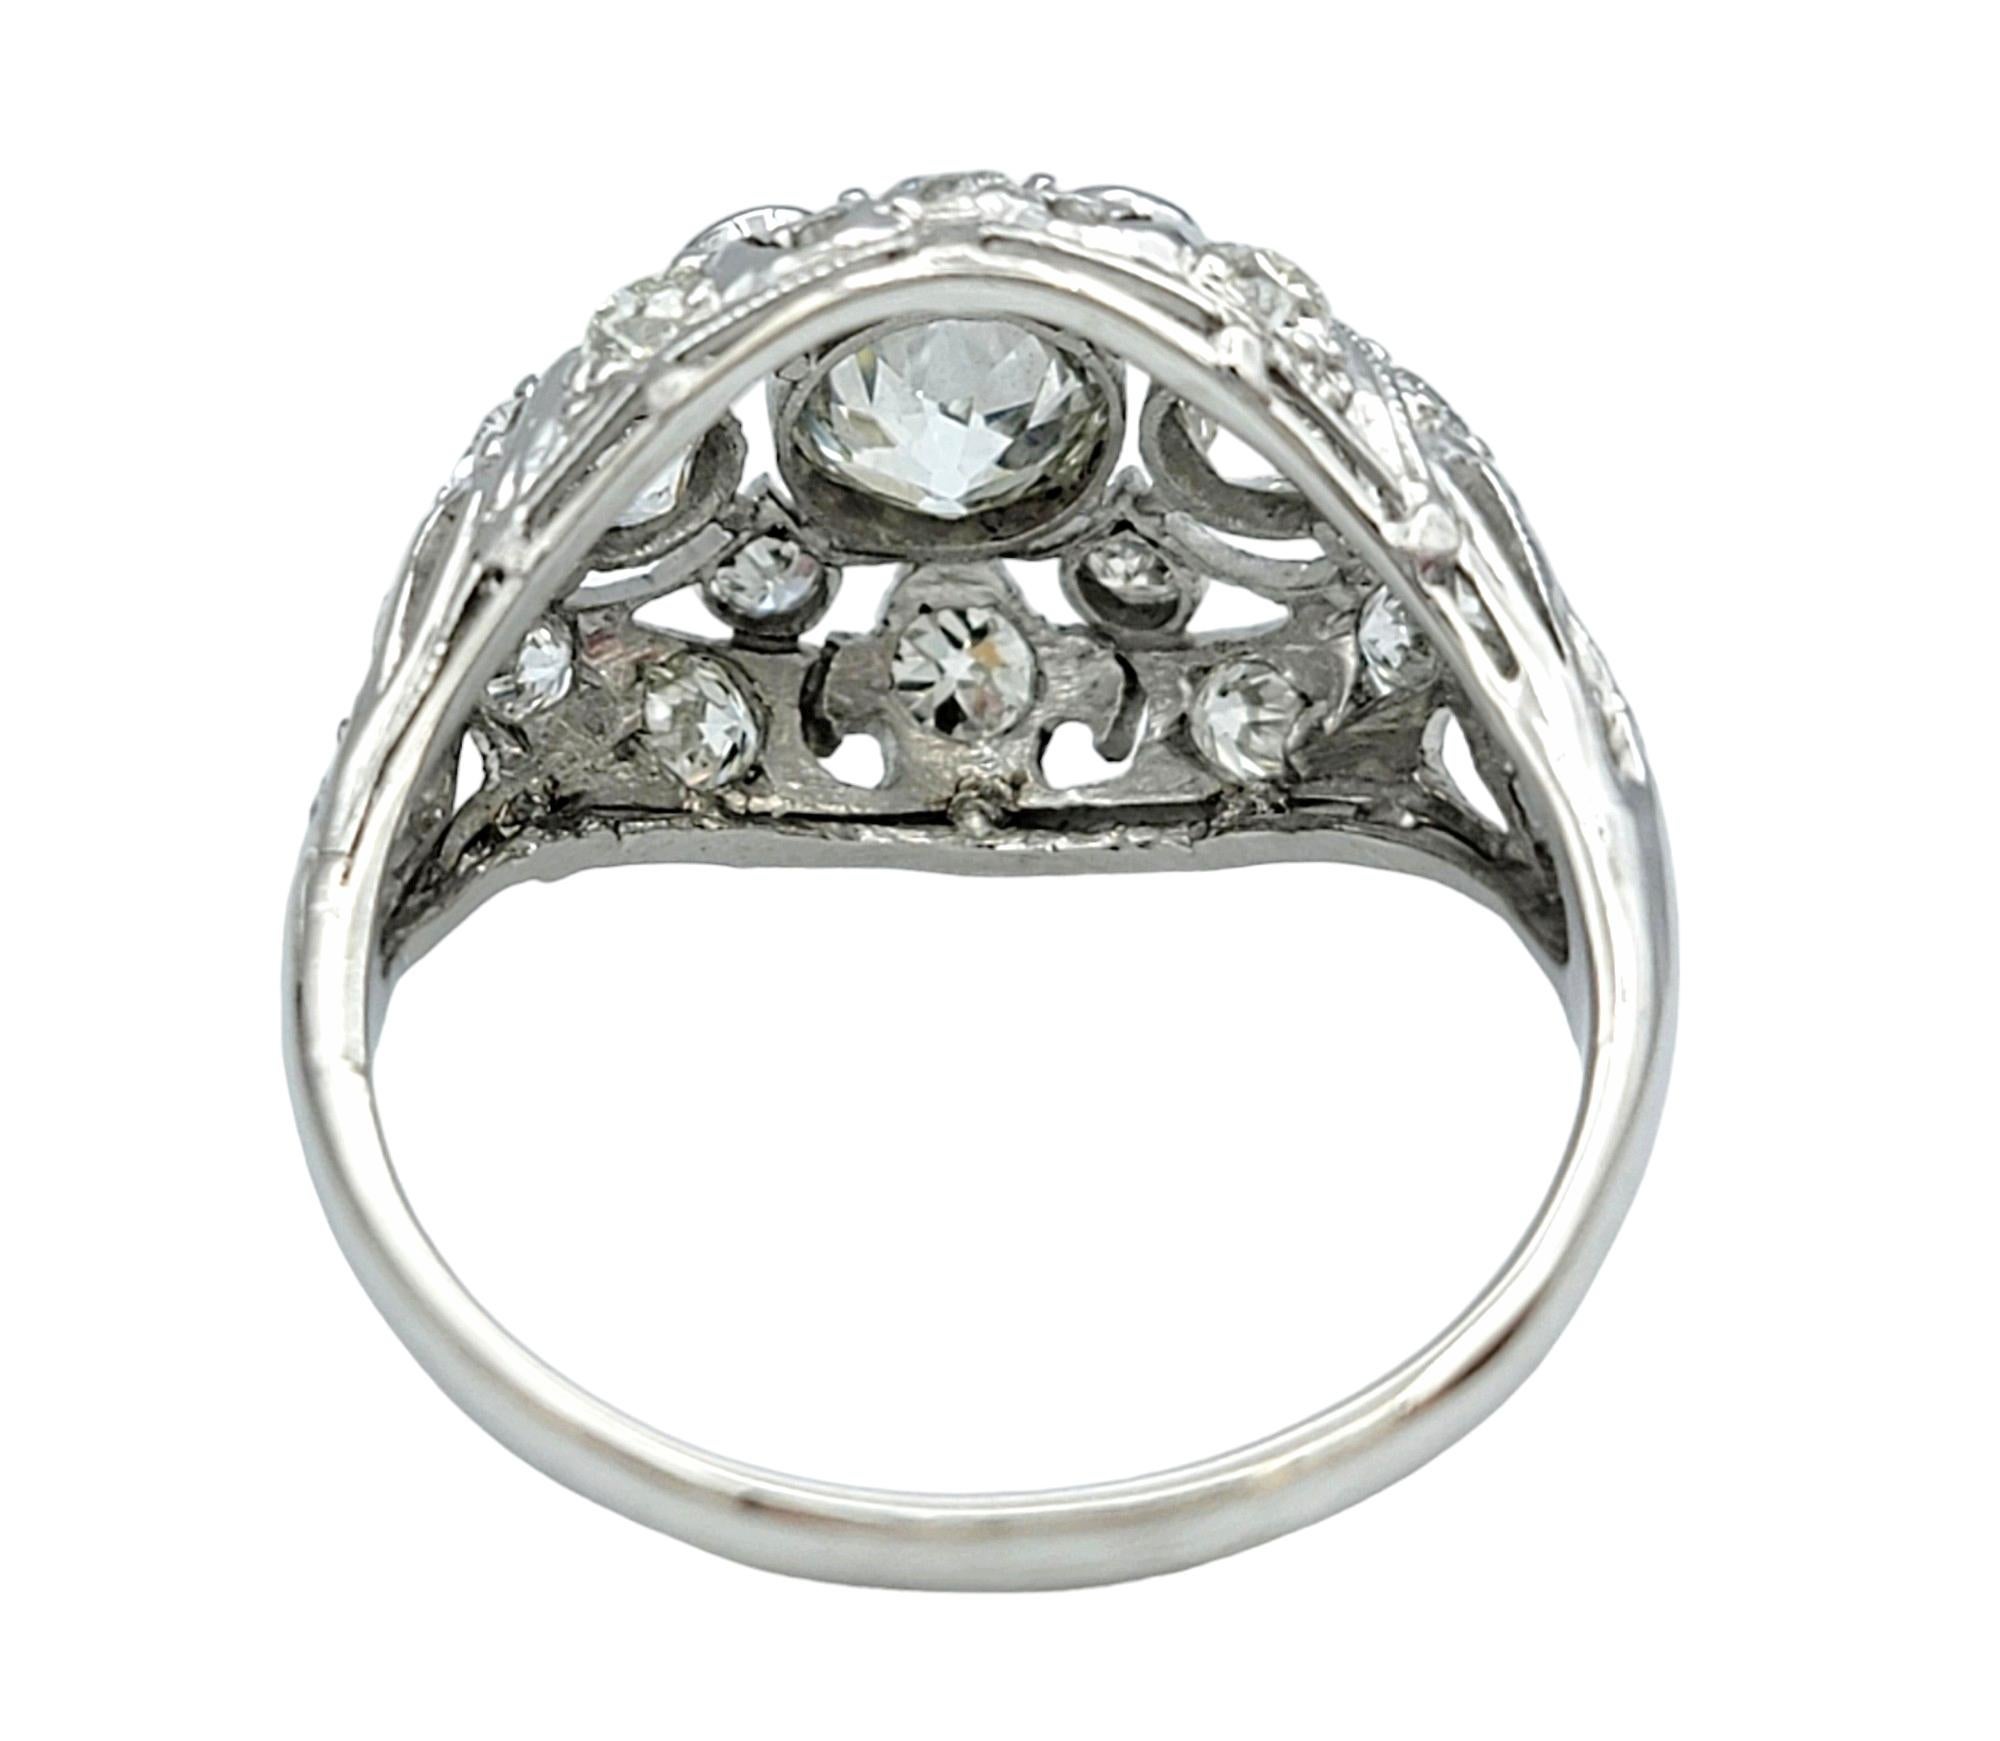 Vintage Cluster Round Diamond Dome Cocktail Ring Set in 14 Karat White Gold In Good Condition For Sale In Scottsdale, AZ